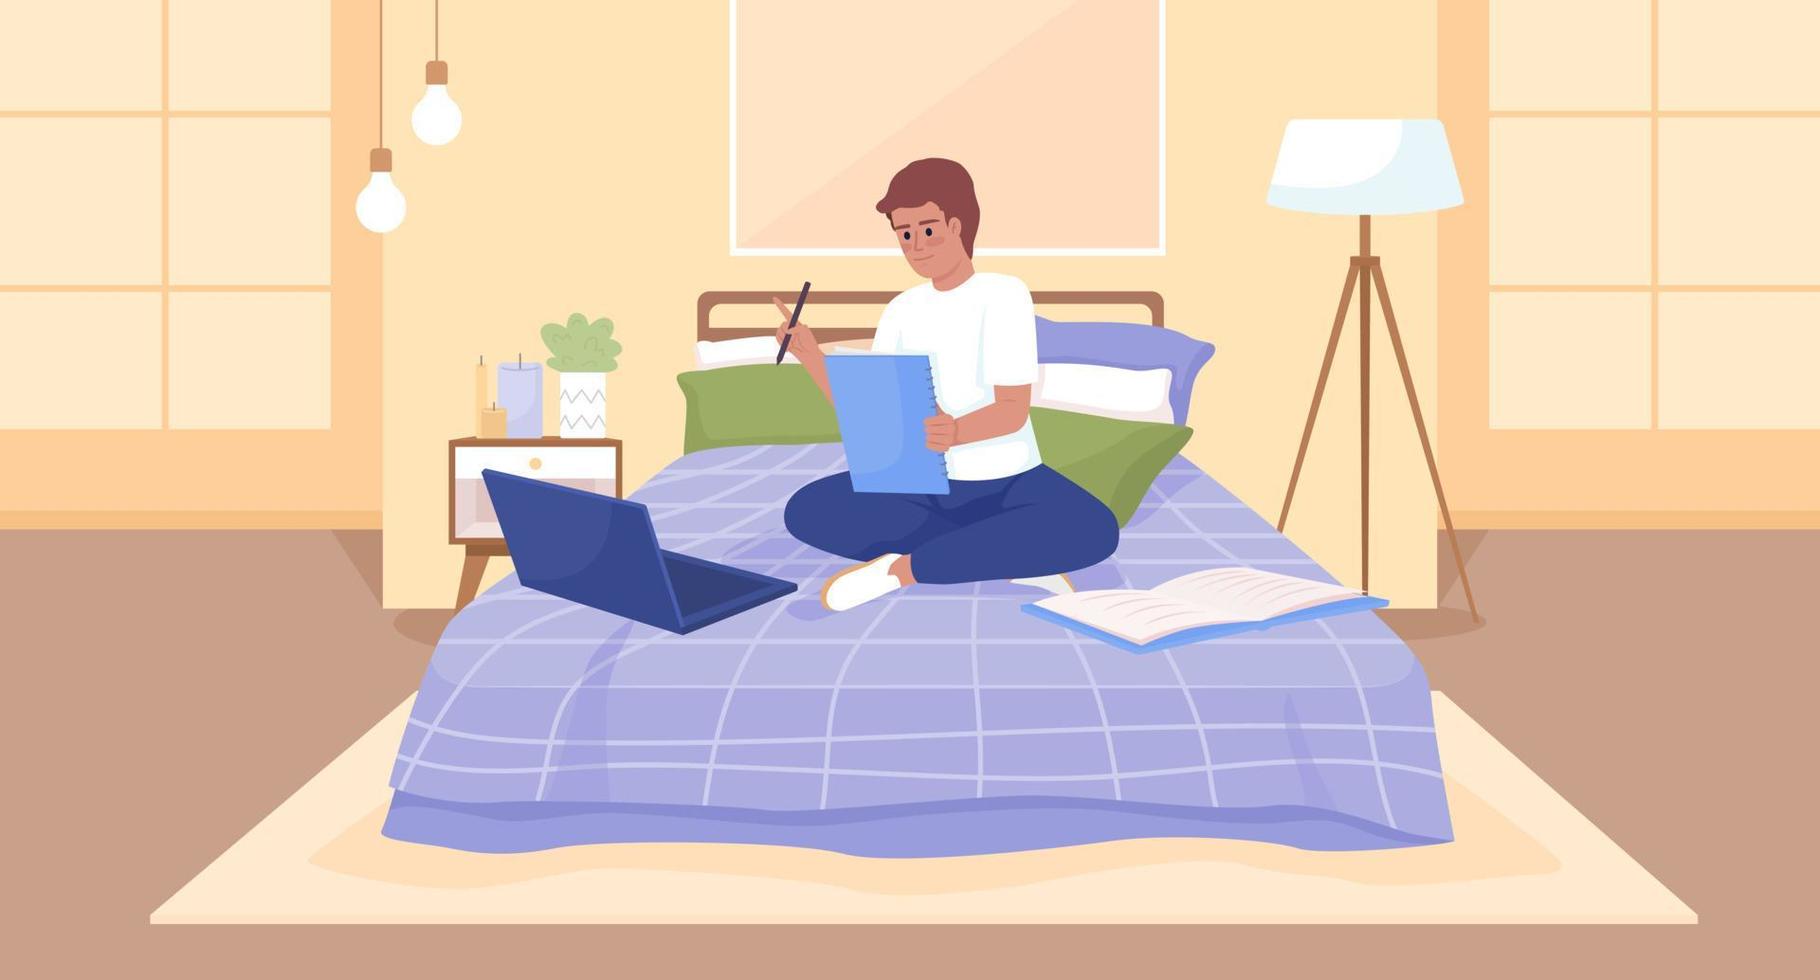 Remote education flat color vector illustration. Online public school. Happy boy doing assignment comfortably in bed. Fully editable 2D simple cartoon characters with bedroom on background